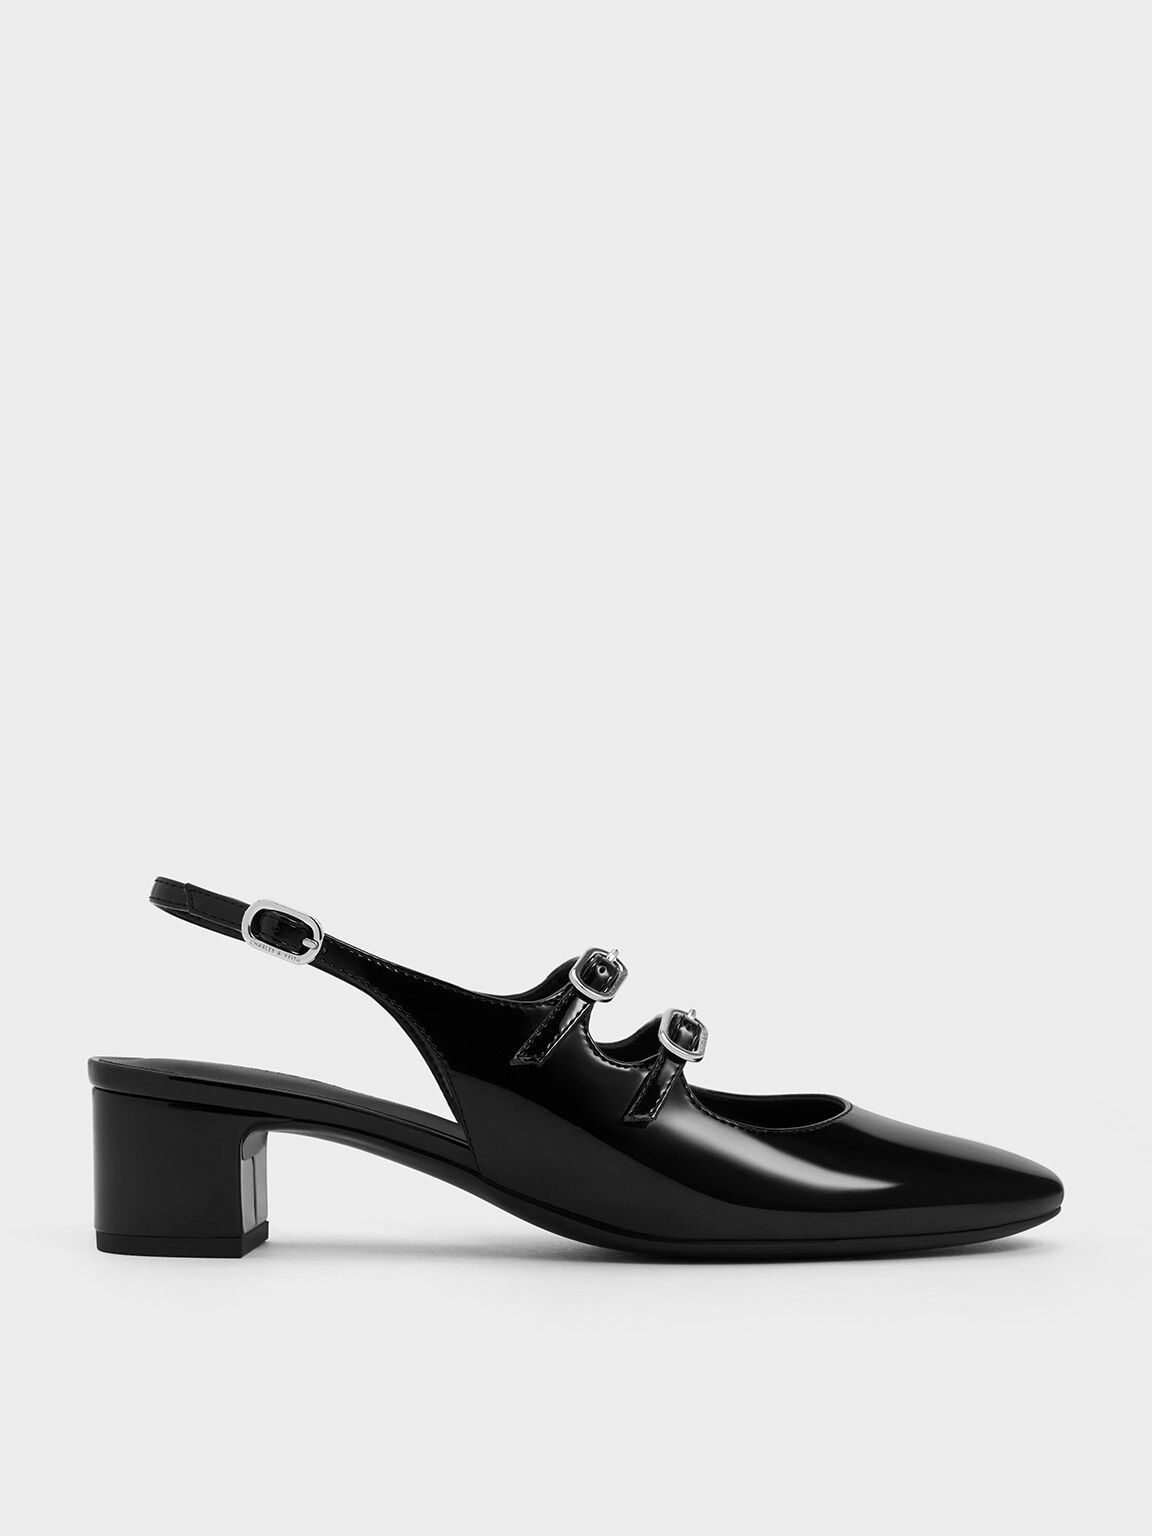 Black Boxed Double-Strap Slingback Mary Jane Pumps - CHARLES & KEITH US